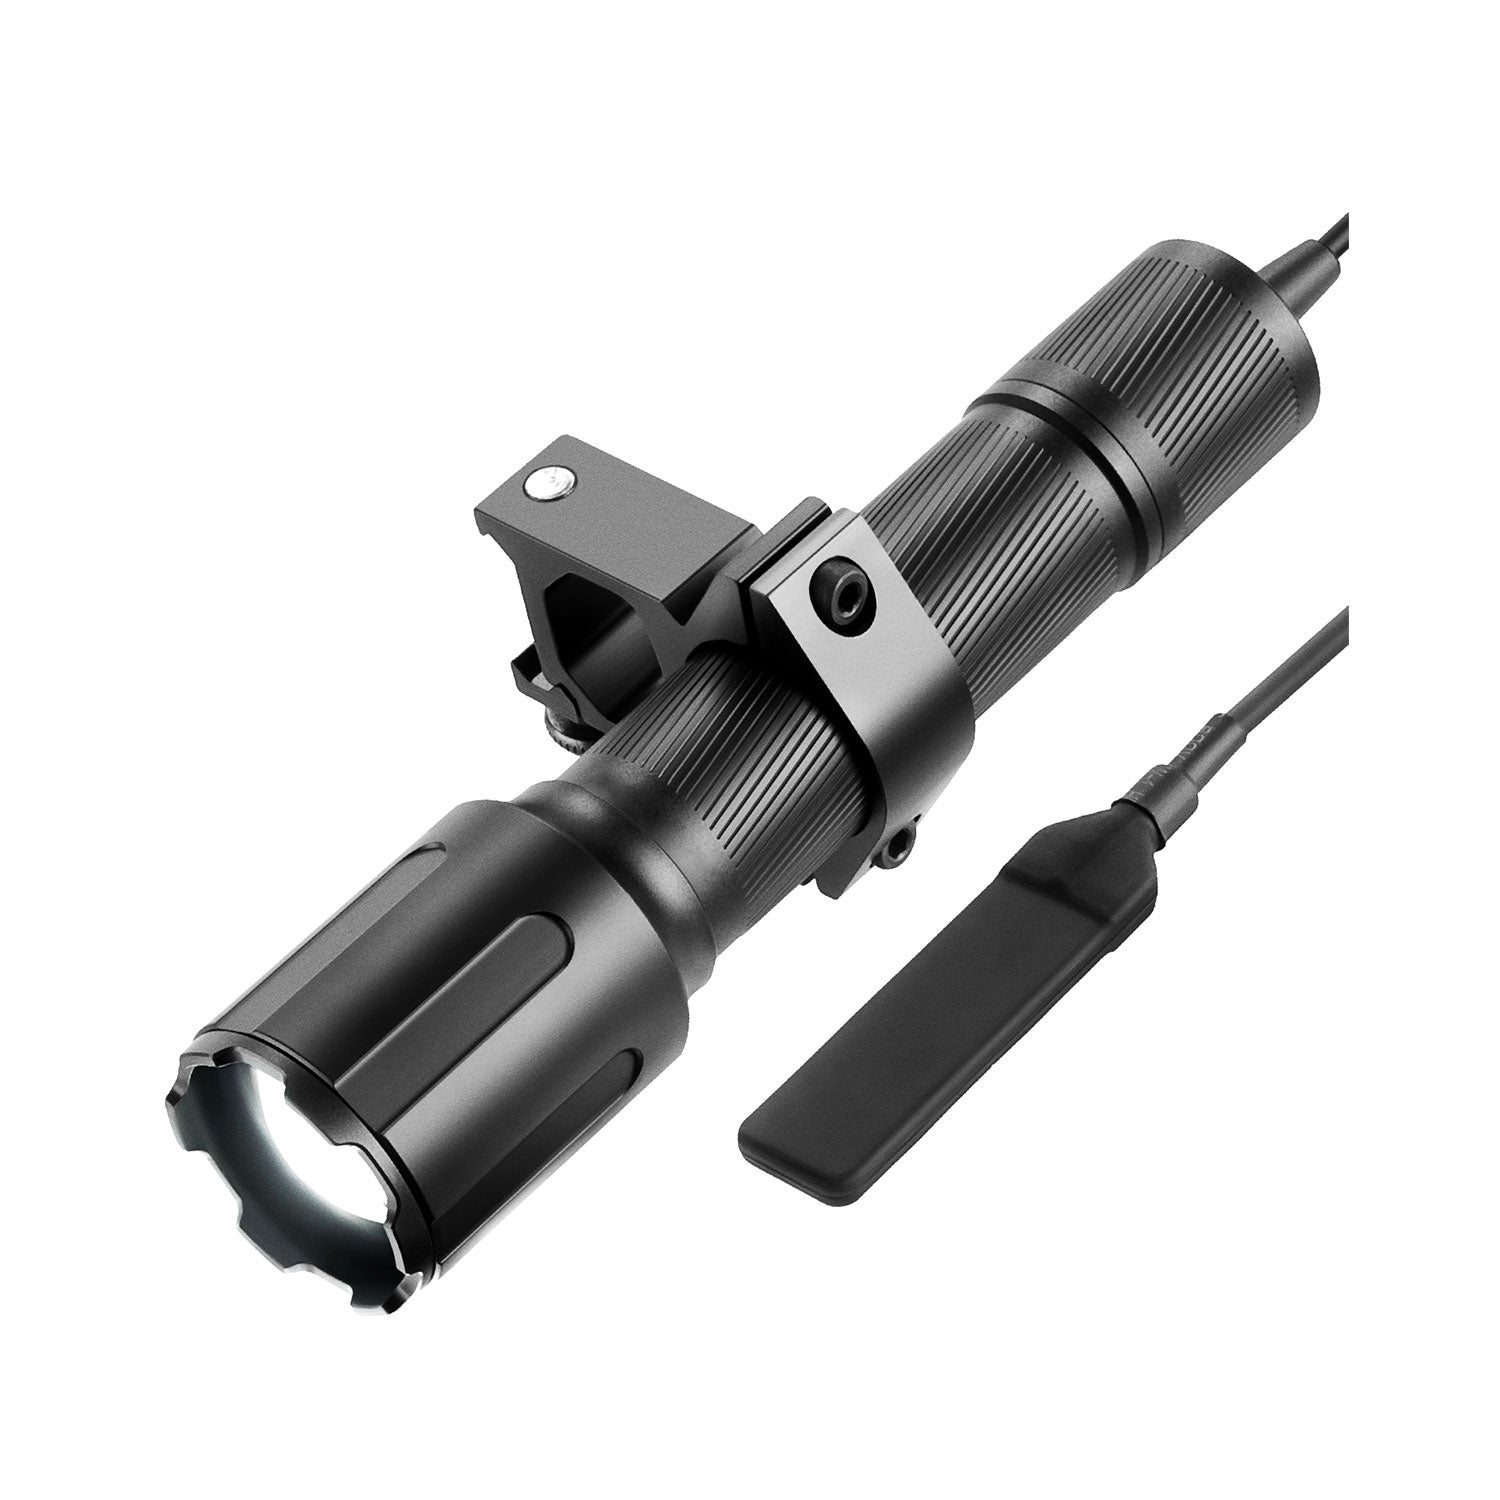 3000 Lumen Tactical Flashlight with Pressure Switch & Mounting Rings, 5 Brightness Levels & Strobe Mode